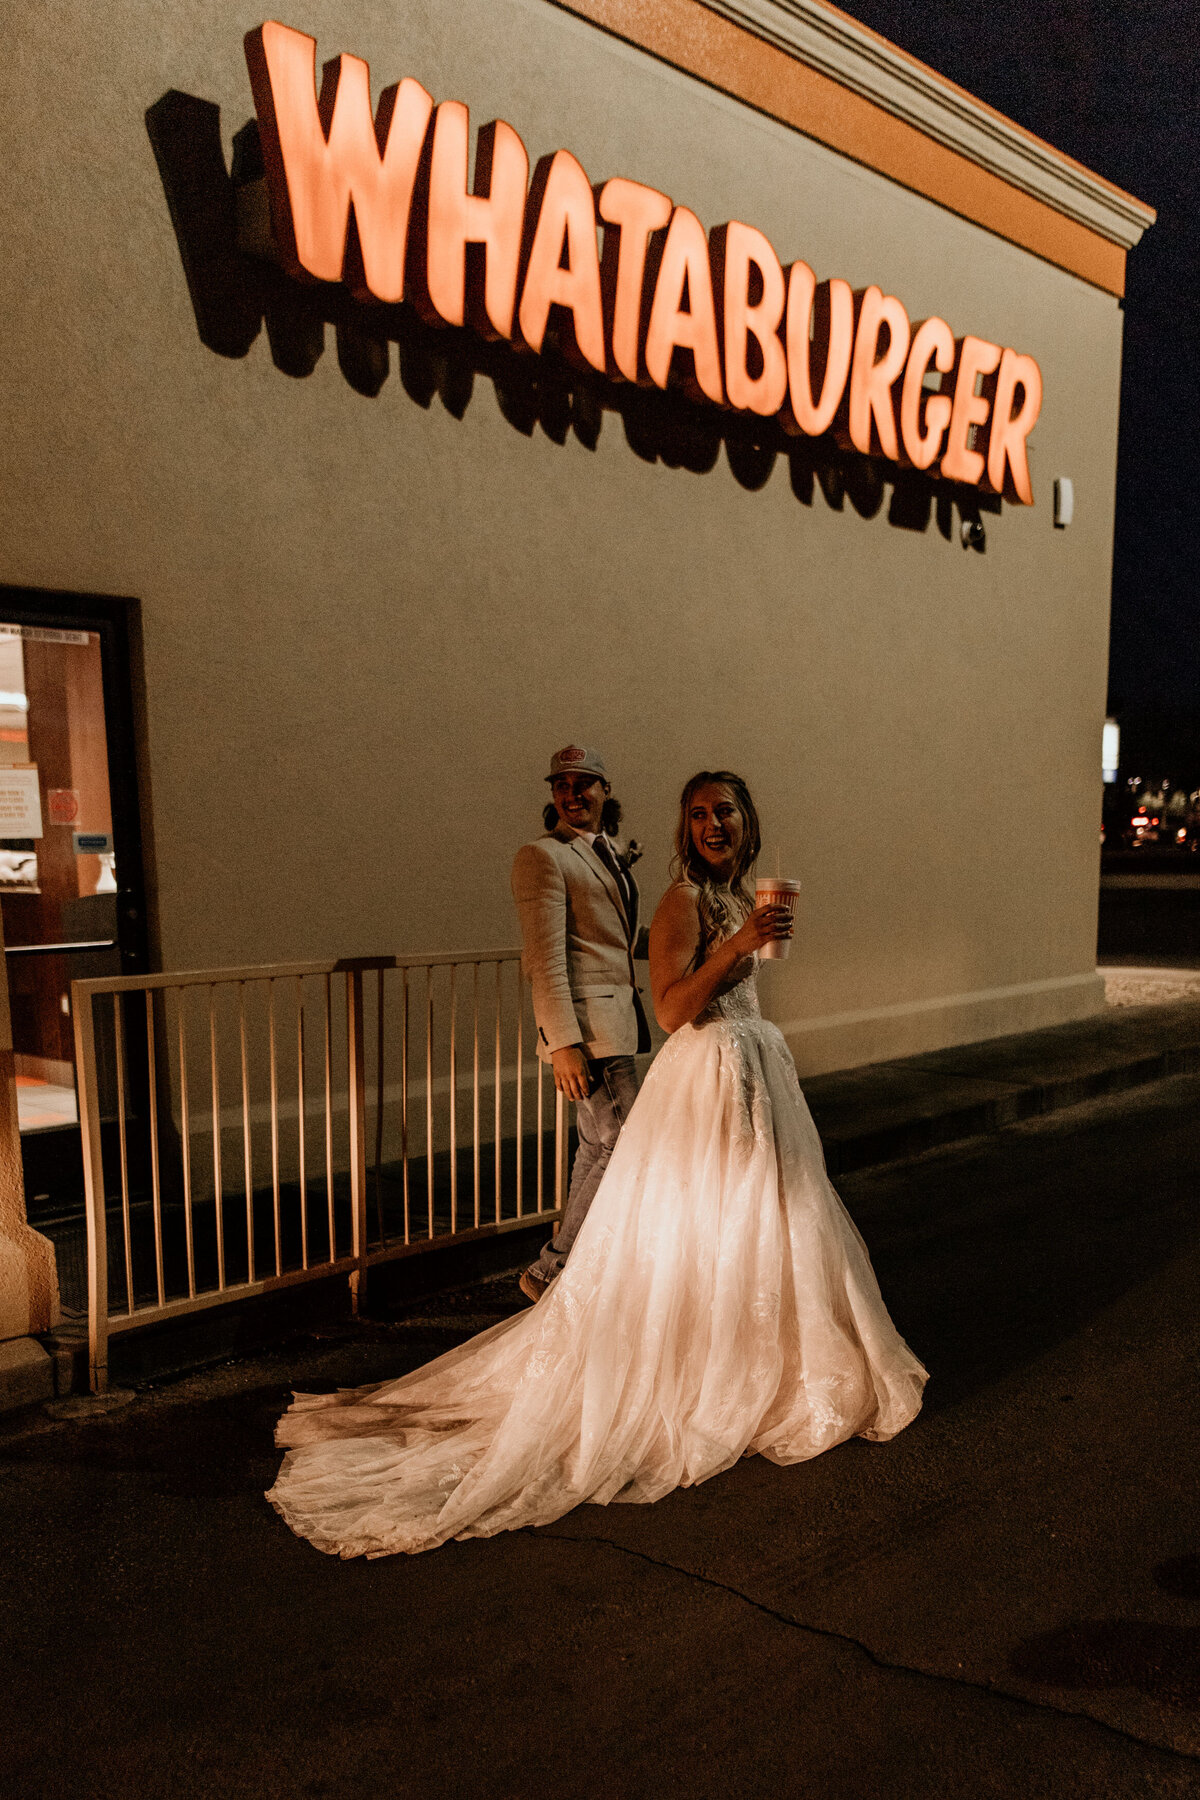 bride and groom ordering food in wedding attire at Whataburger drive thru